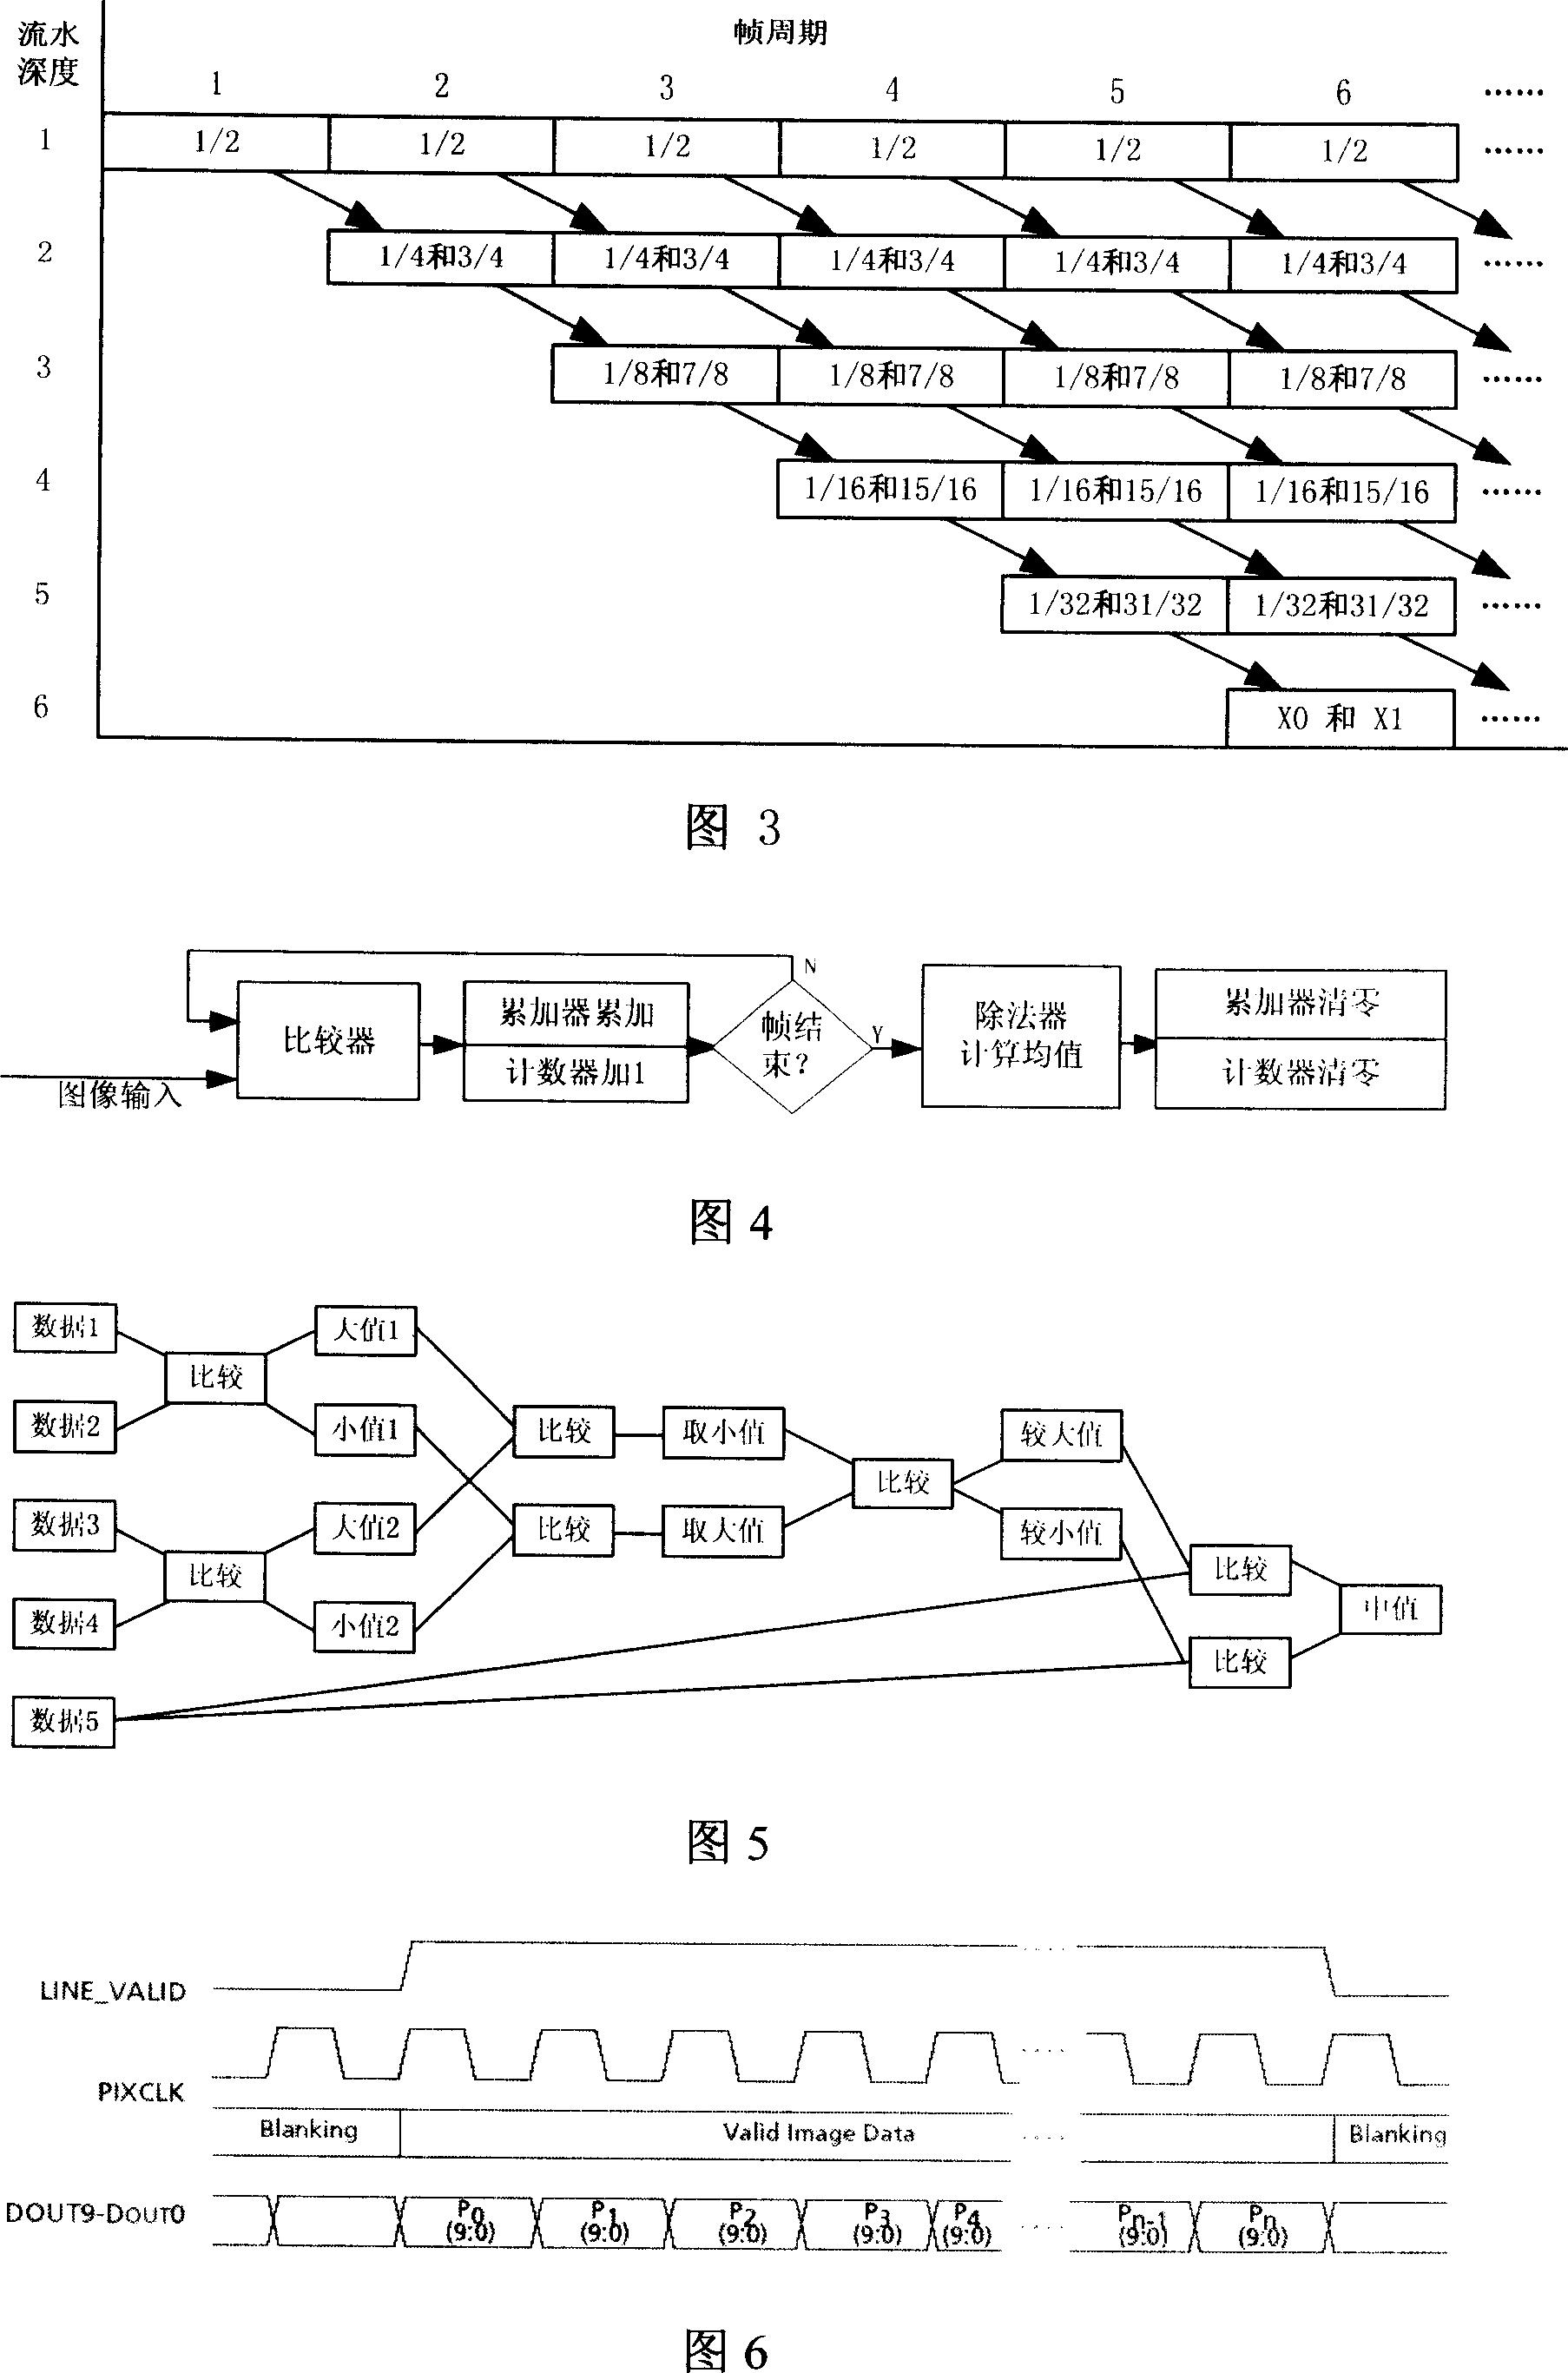 Infrared image multistage mean contrast enhancement method